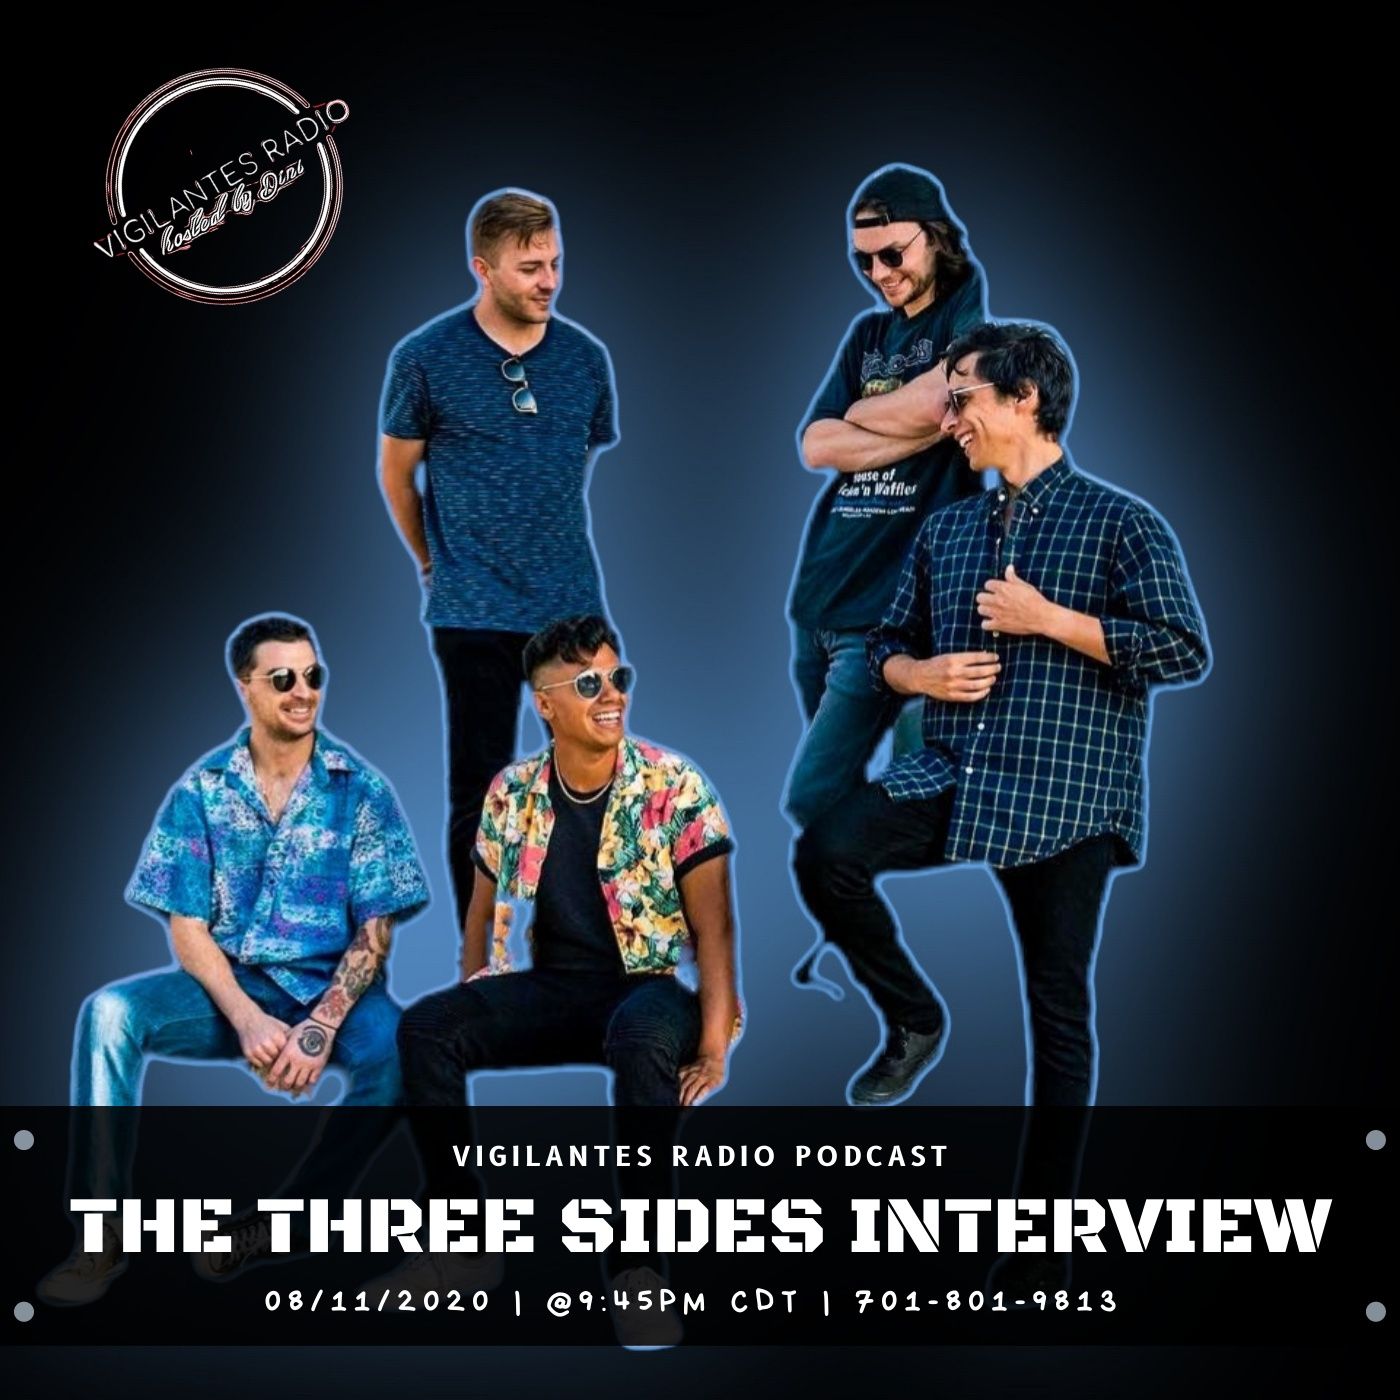 The Three Sides Interview. Image